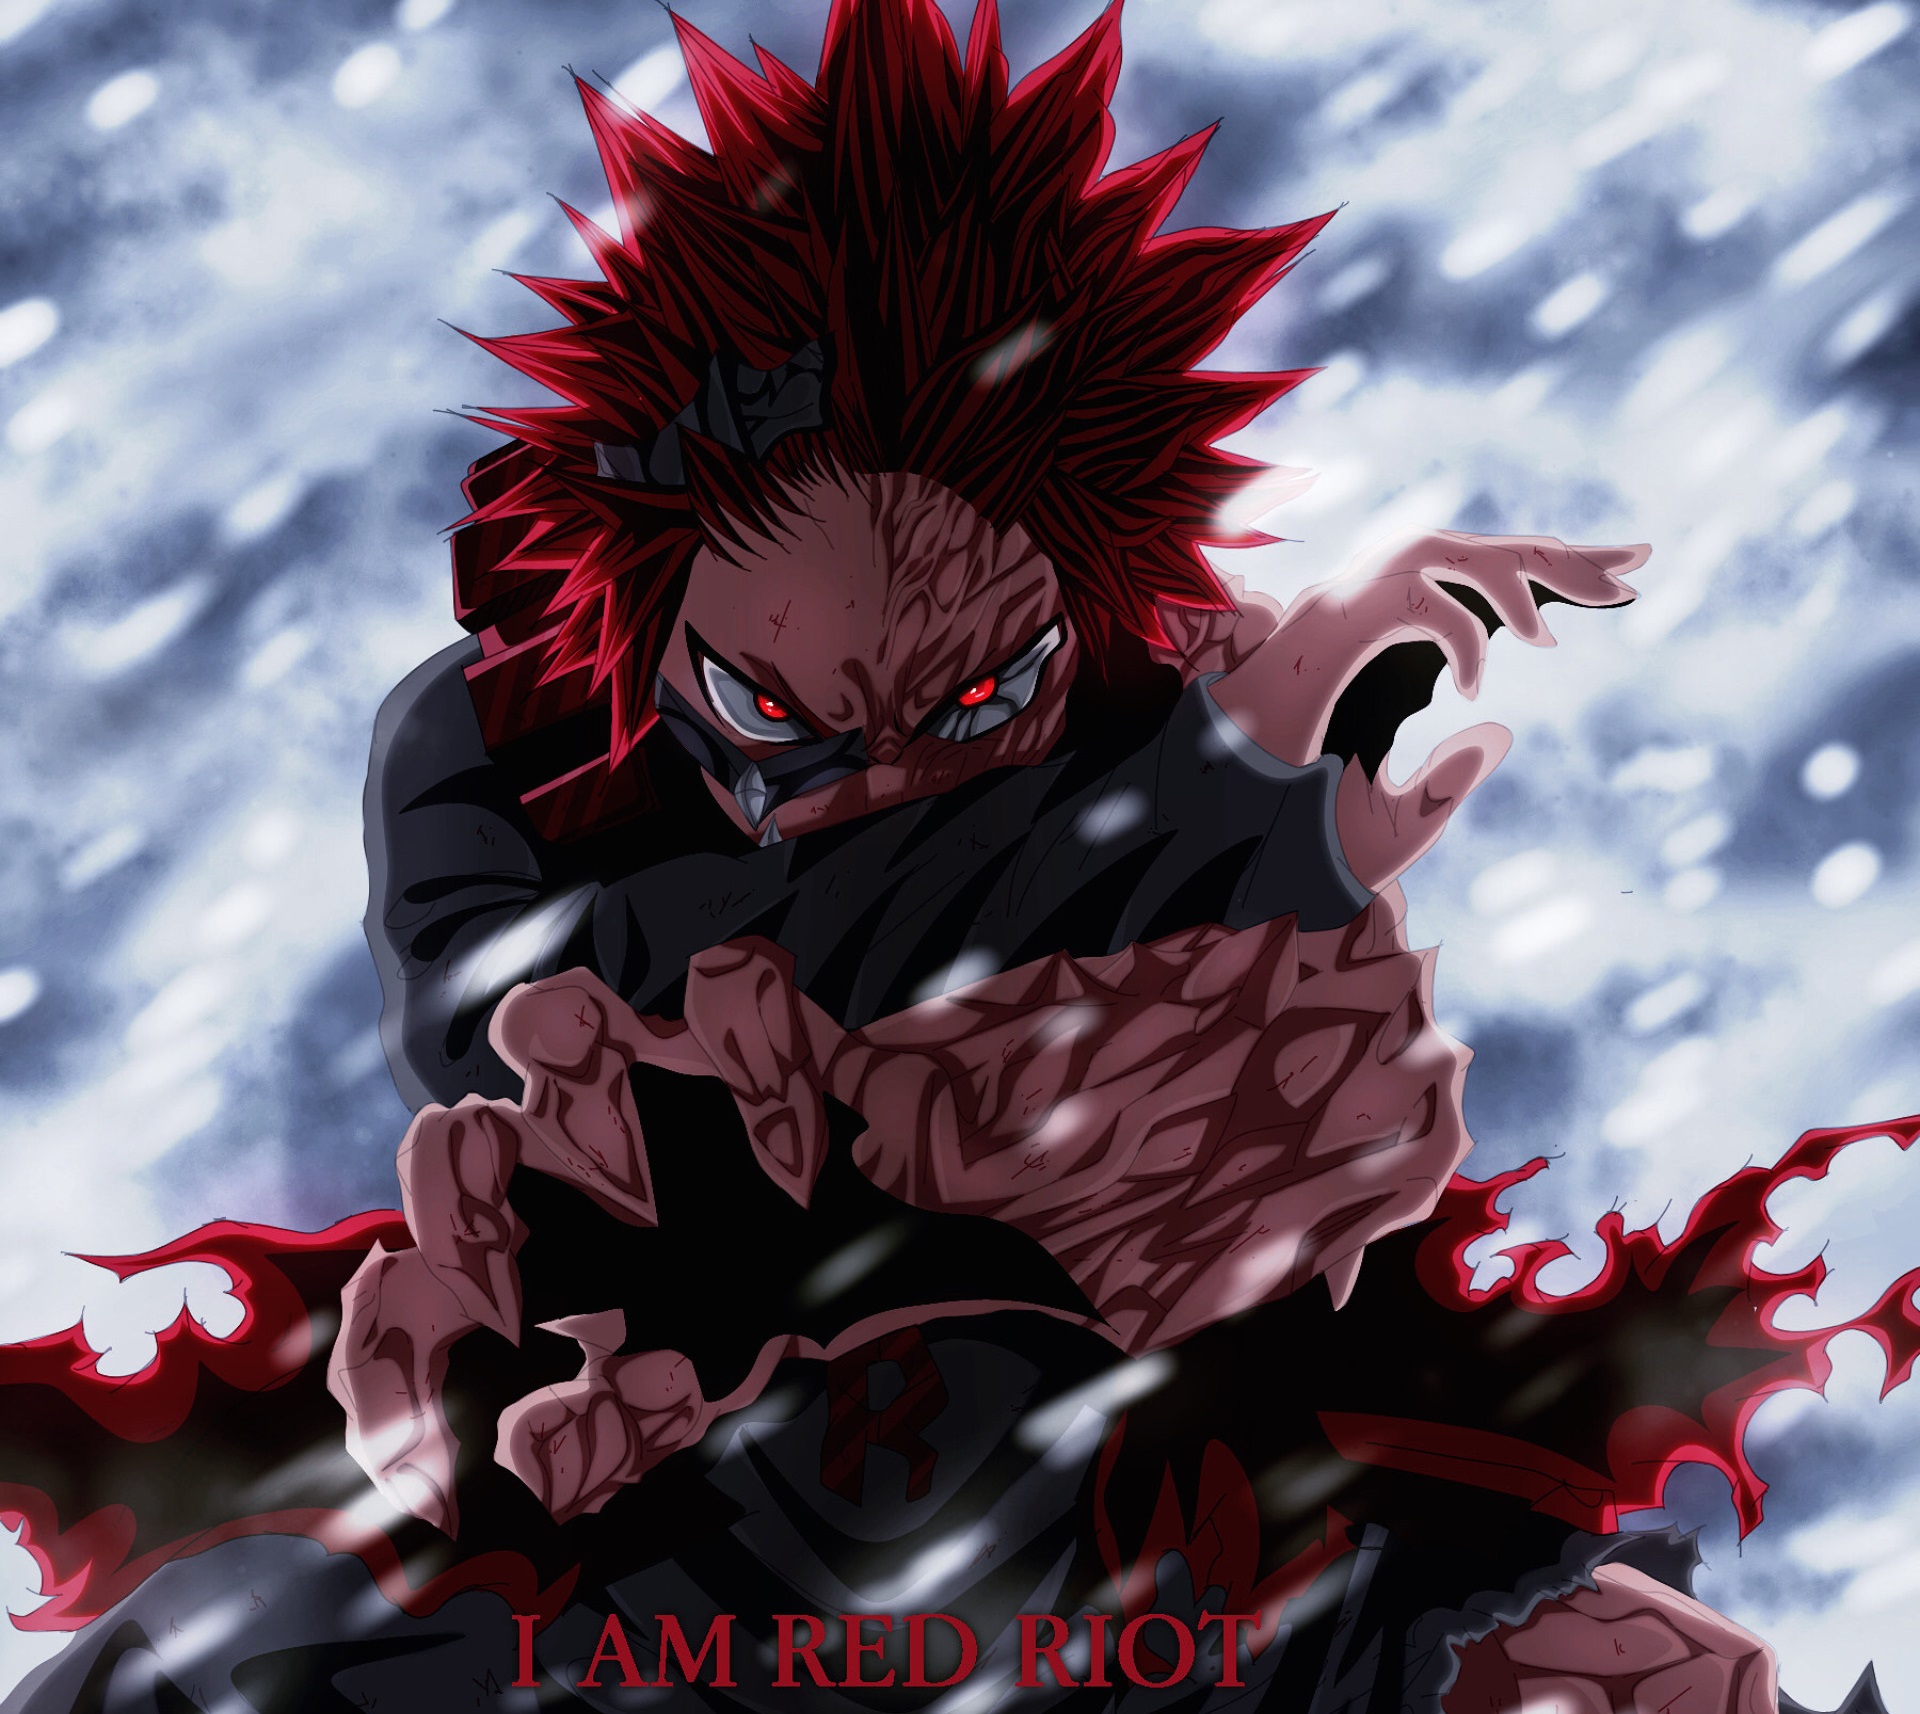 I AM RED RIOT by Escanor54